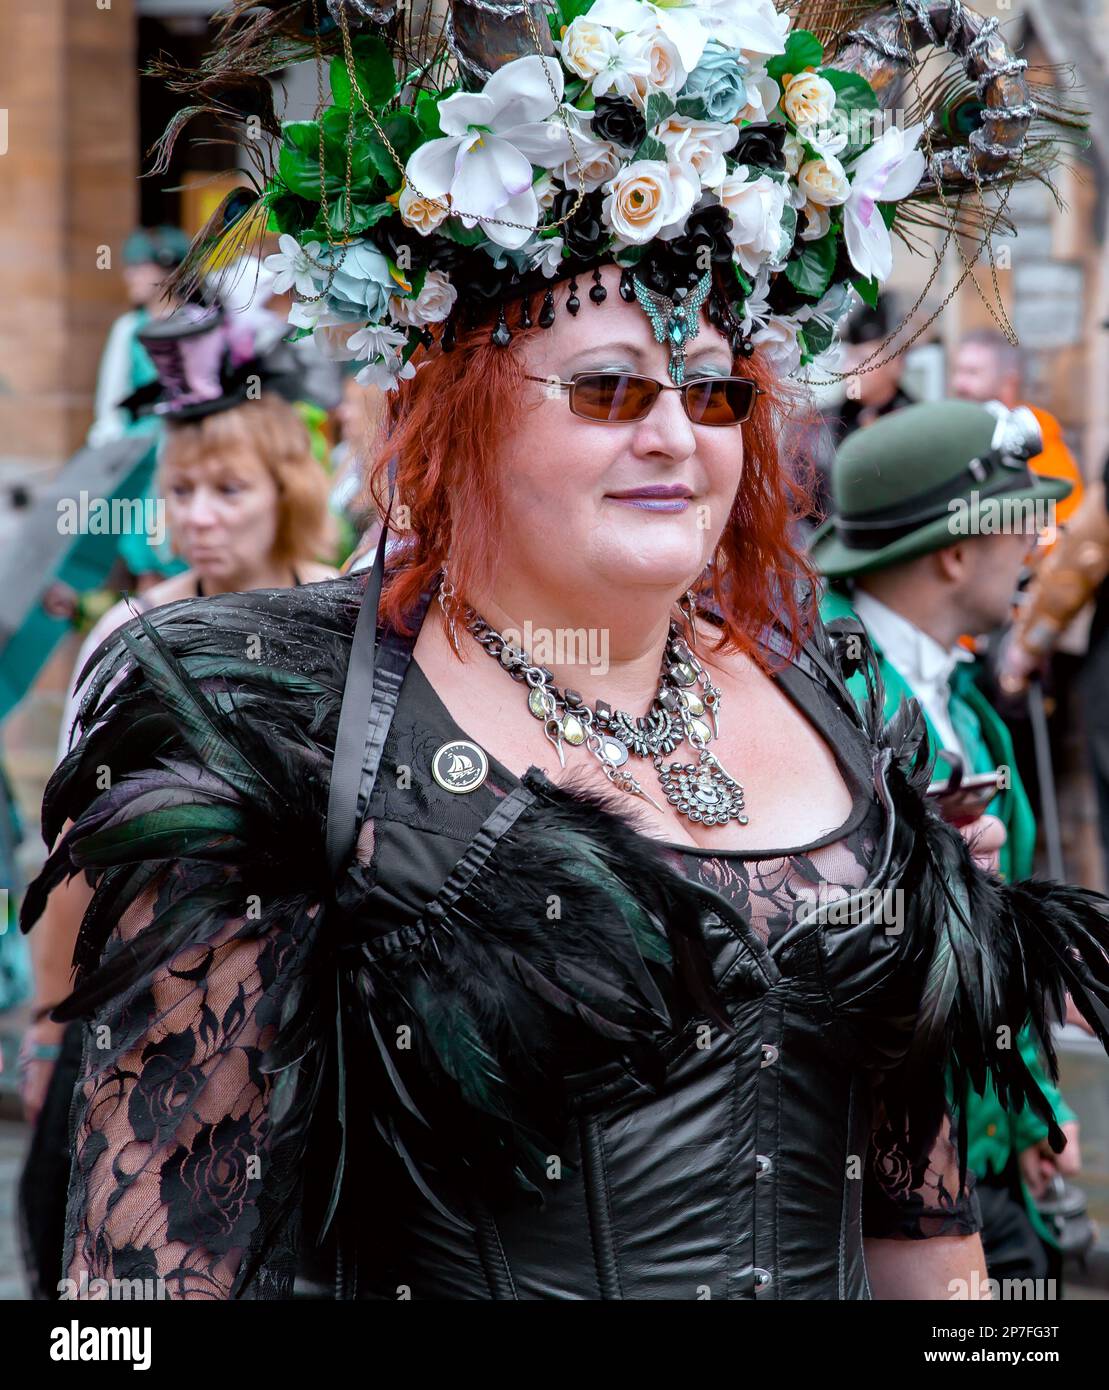 Portrait of a flamboyantly dressed female steampunk. Stock Photo